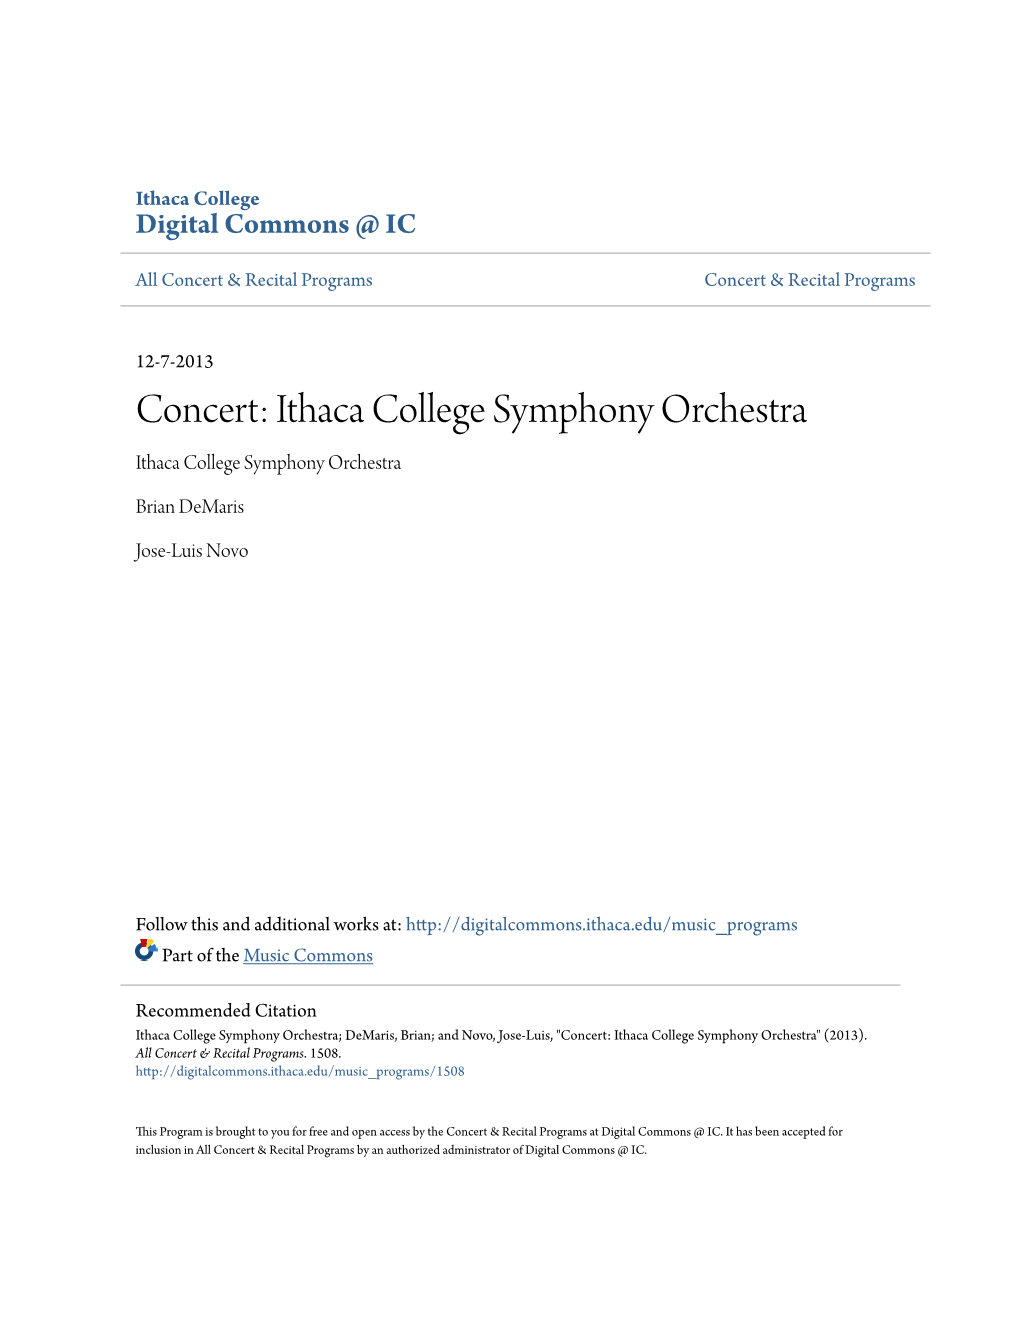 Concert: Ithaca College Symphony Orchestra Ithaca College Symphony Orchestra